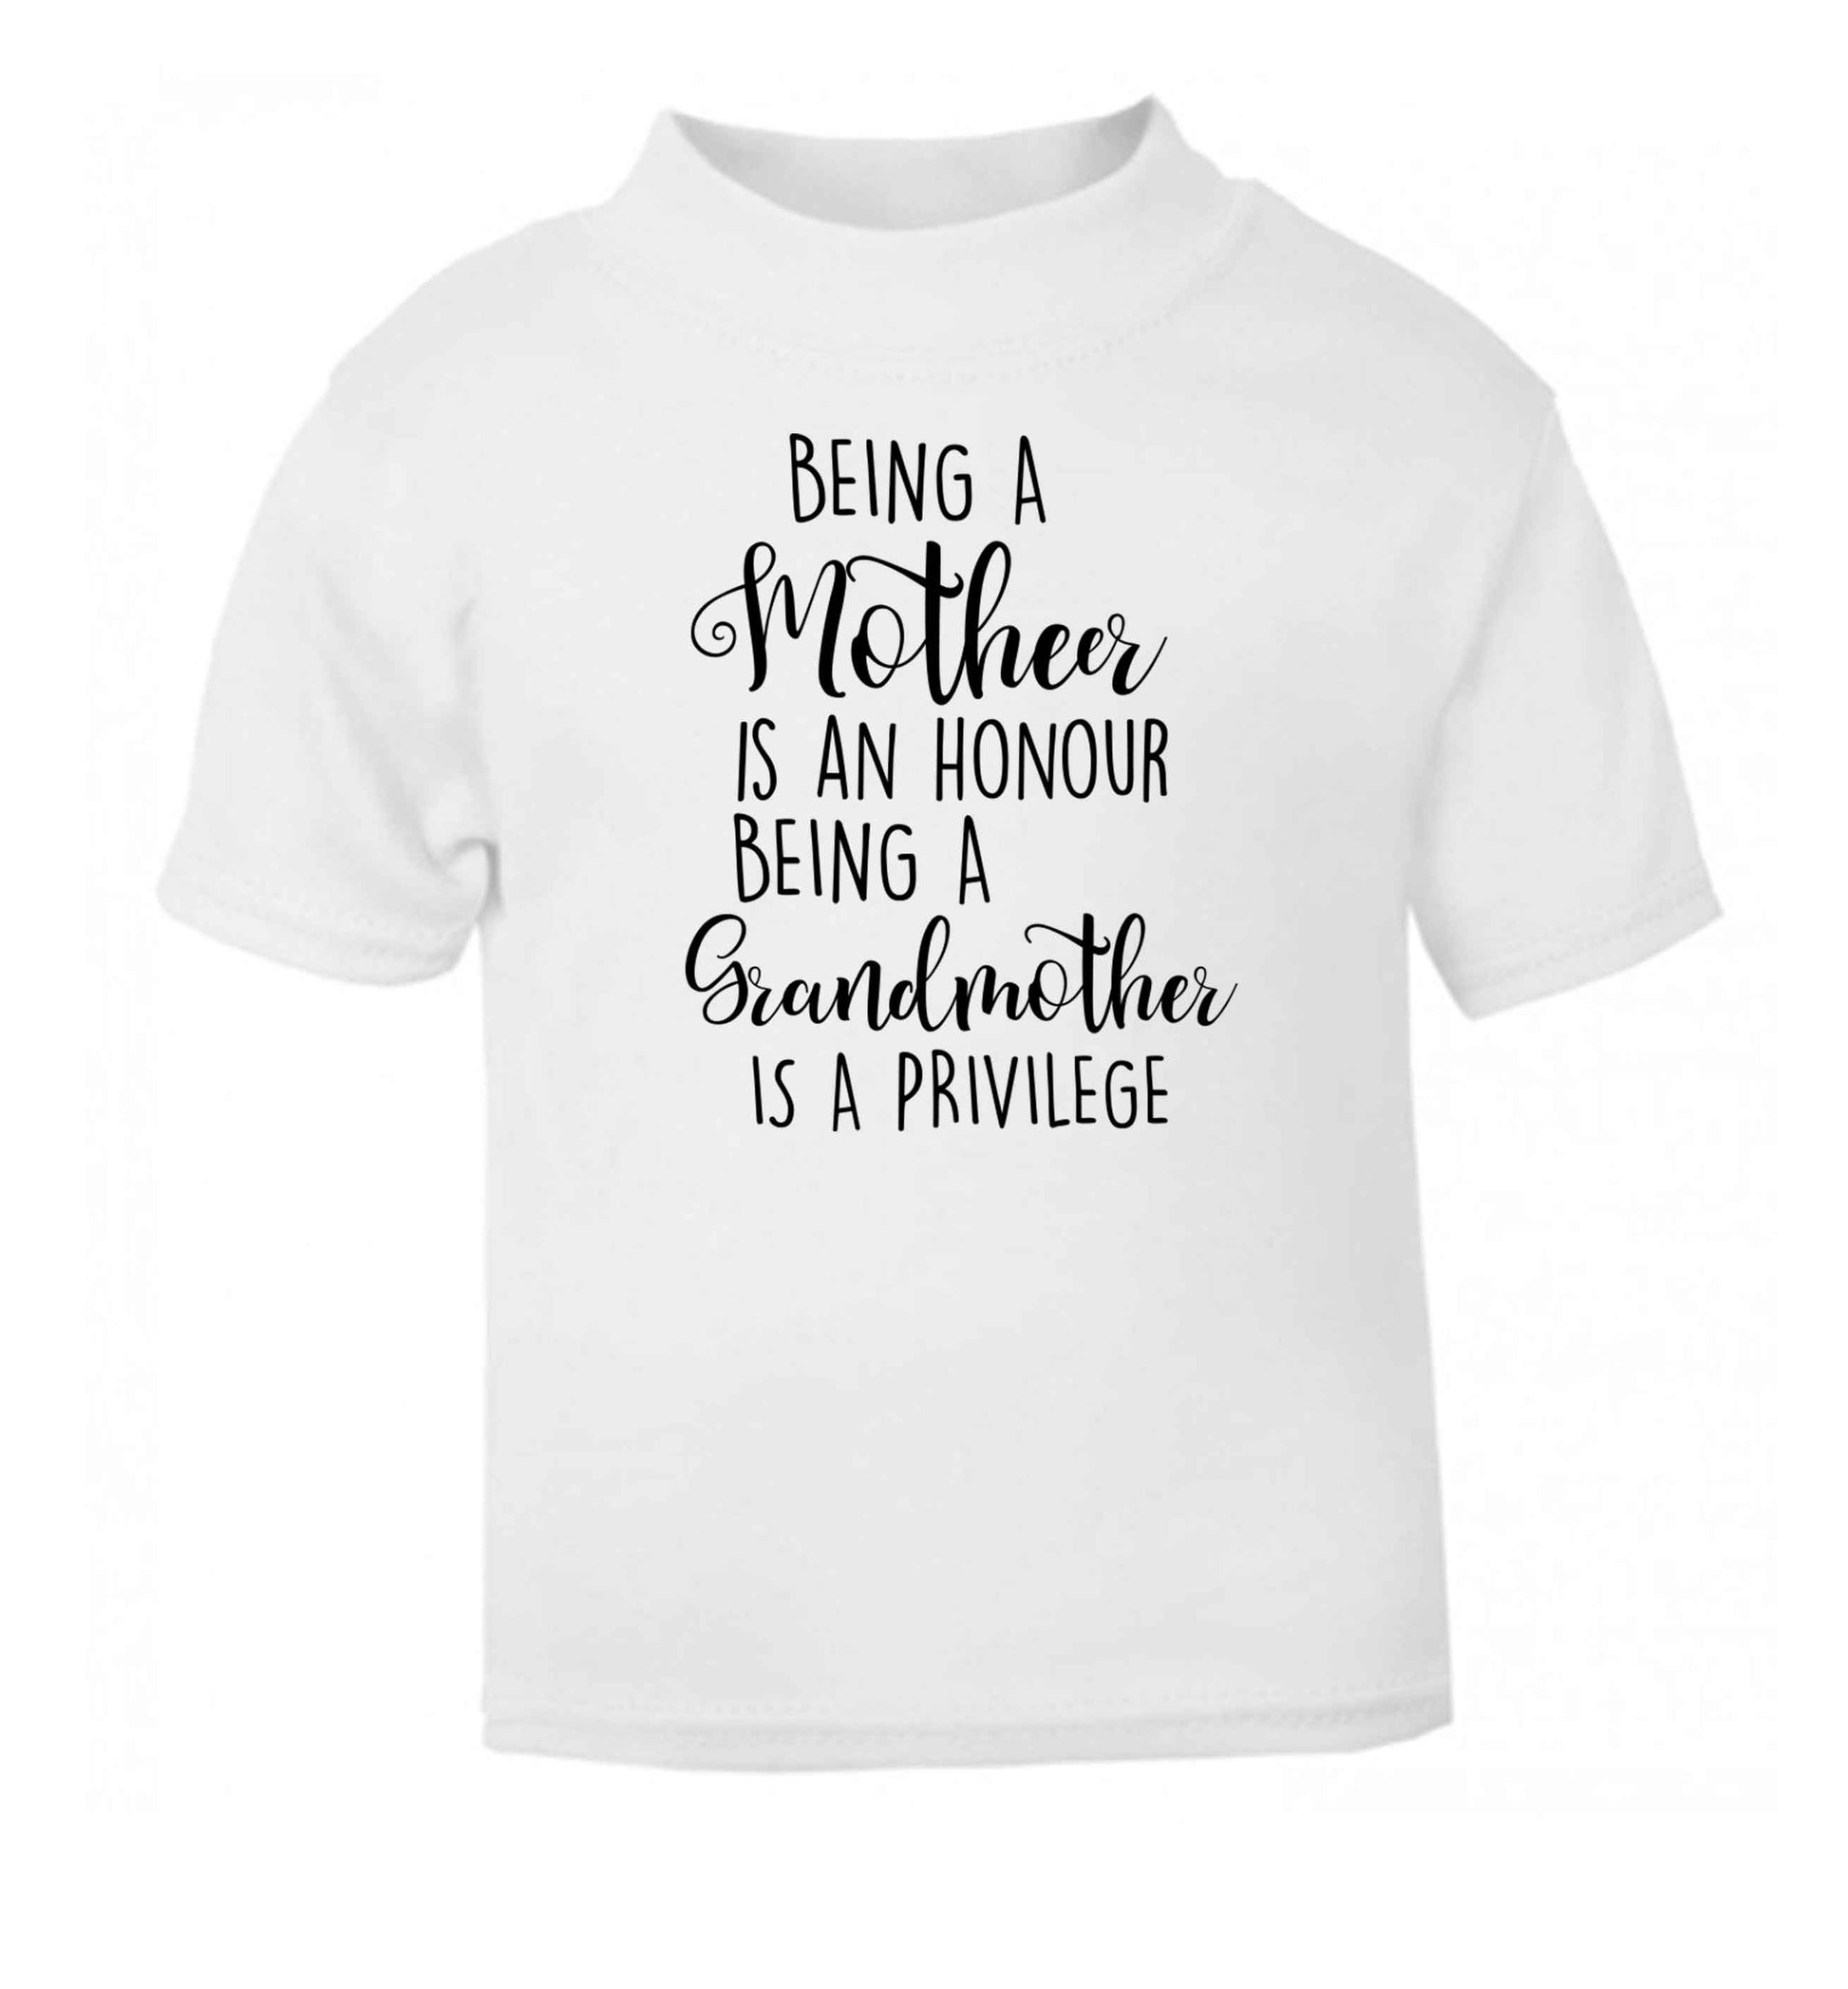 Being a mother is an honour being an grandmother is a privilege white Baby Toddler Tshirt 2 Years